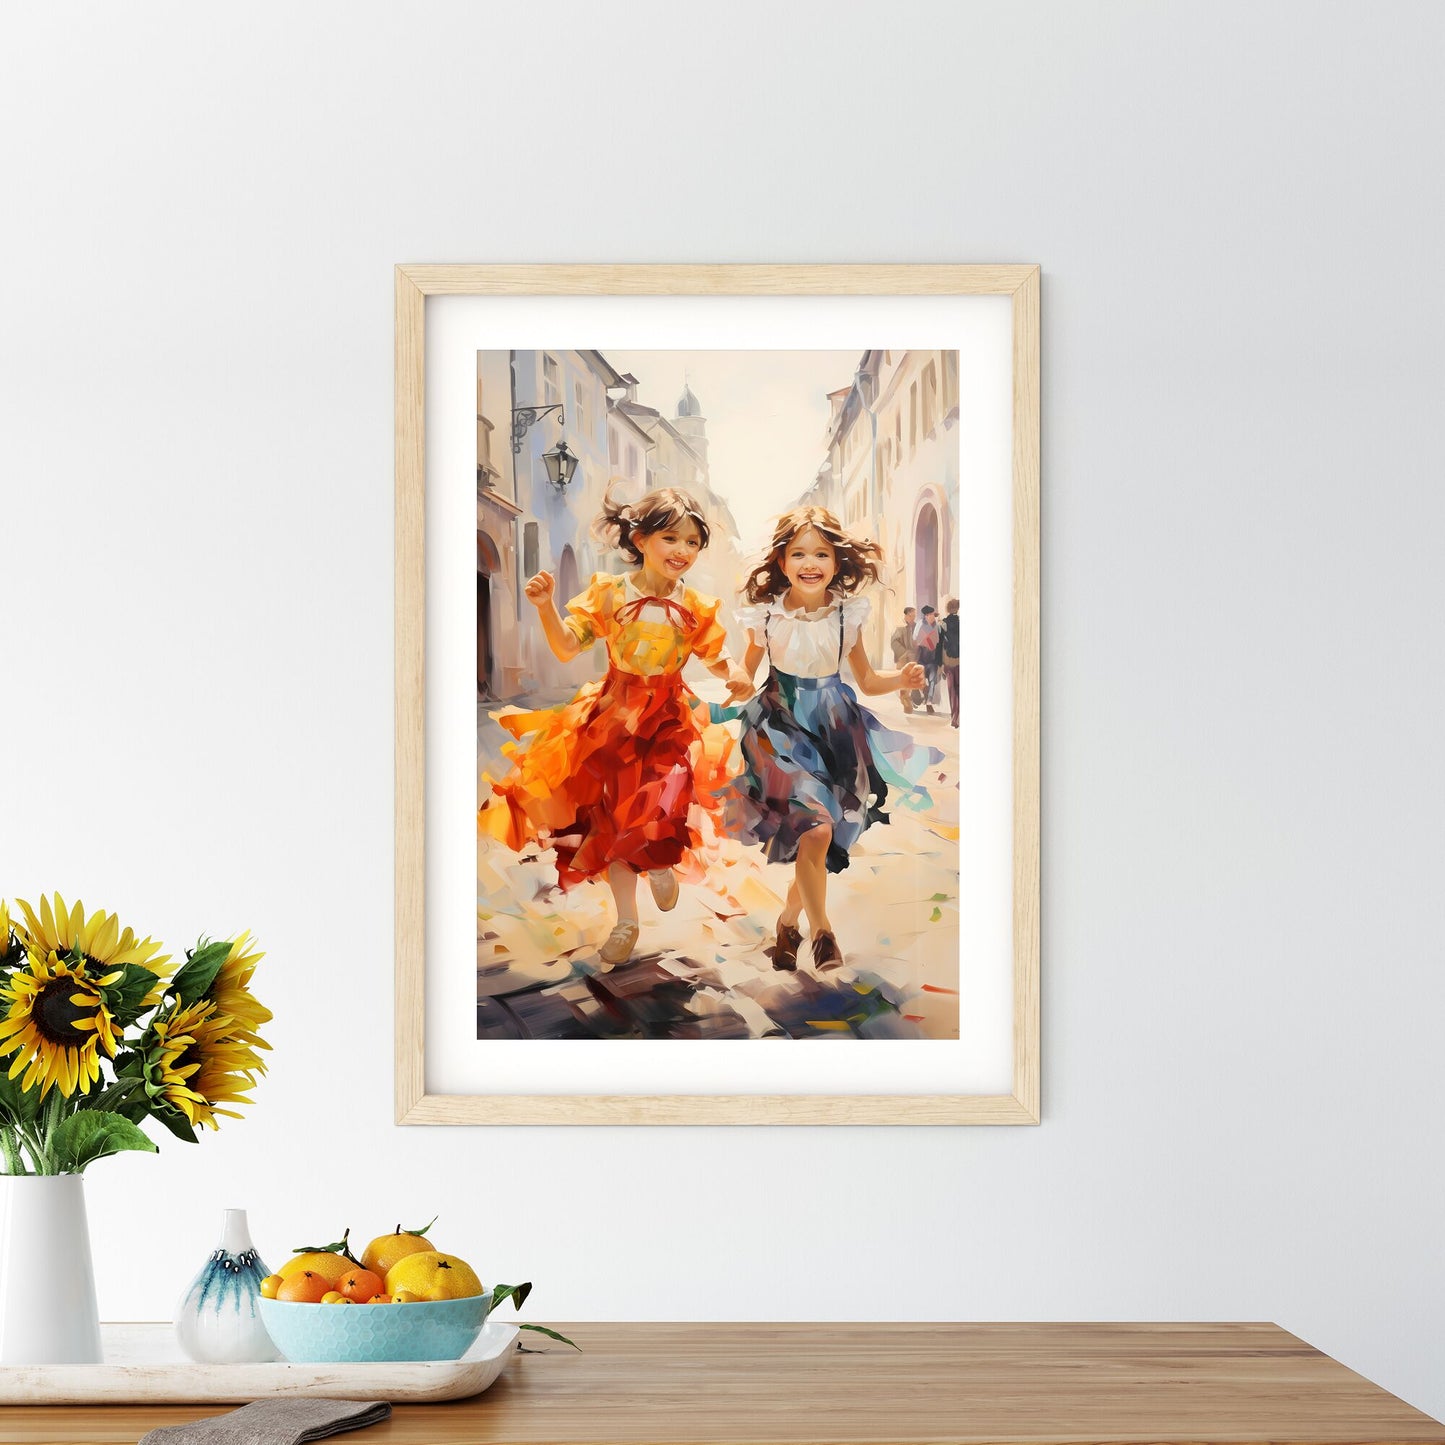 Kids Playing In Berlin - A Painting Of Two Girls Running On A Street Default Title